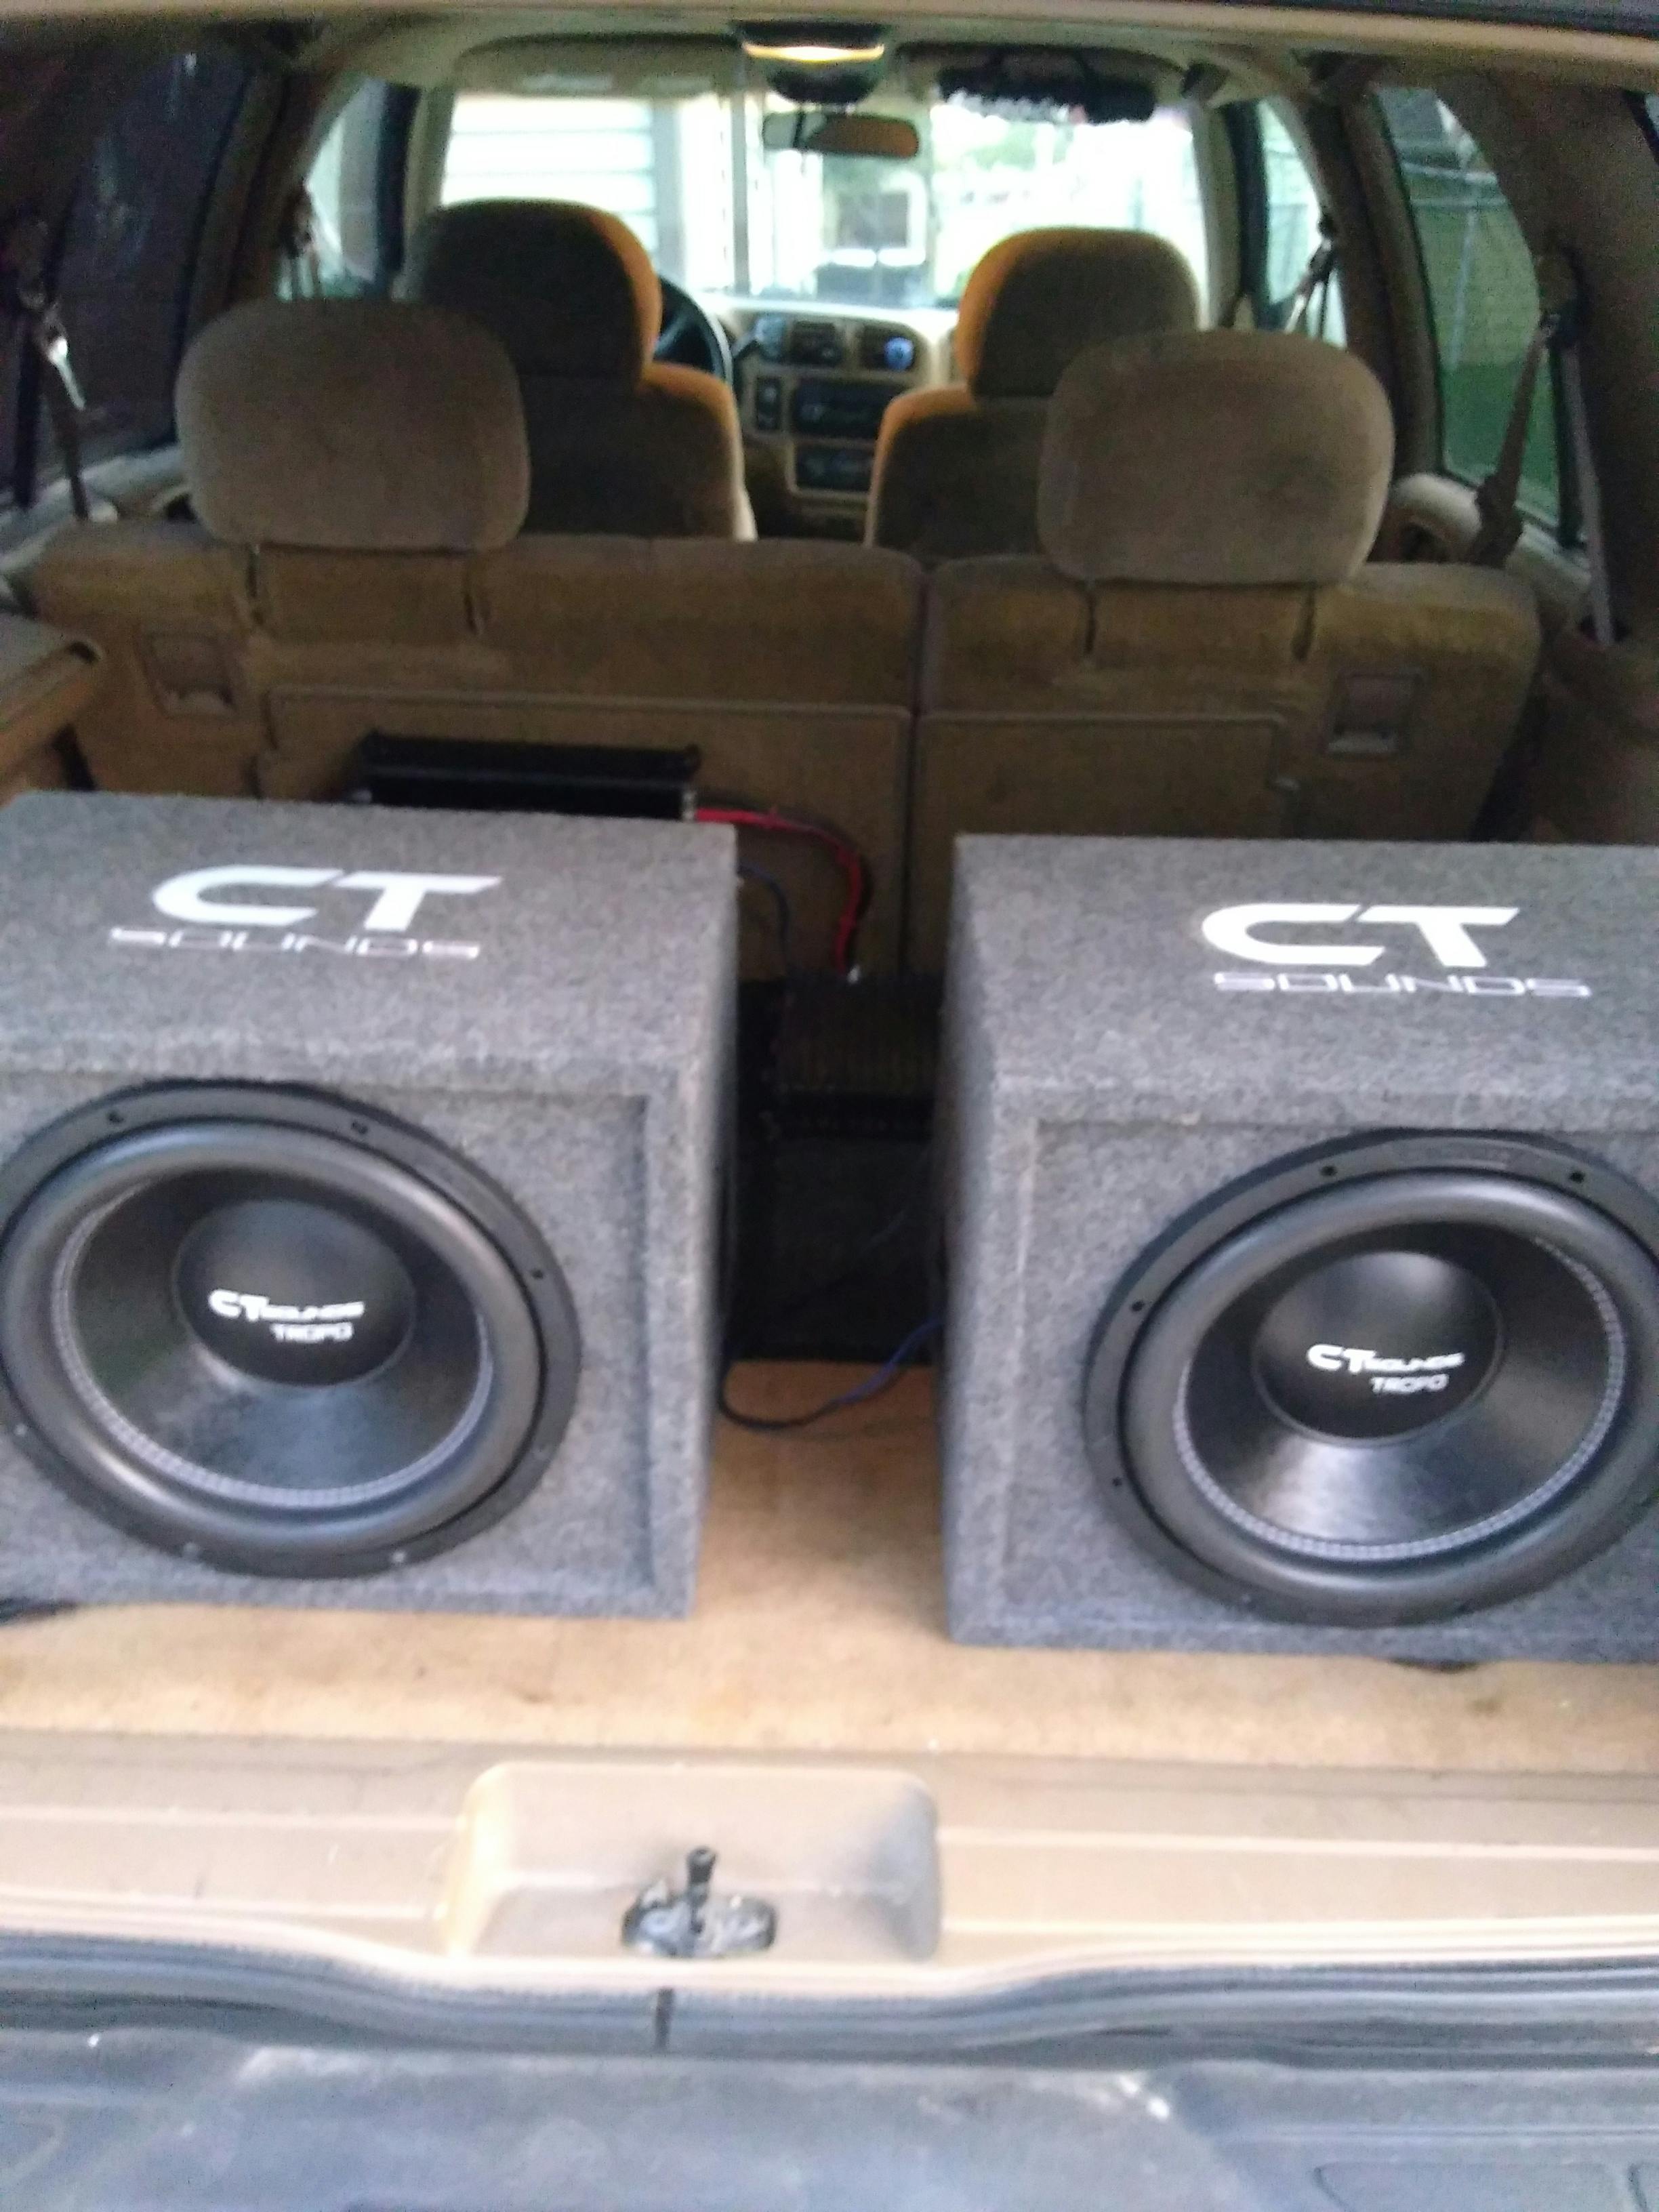 ct sounds 6.5